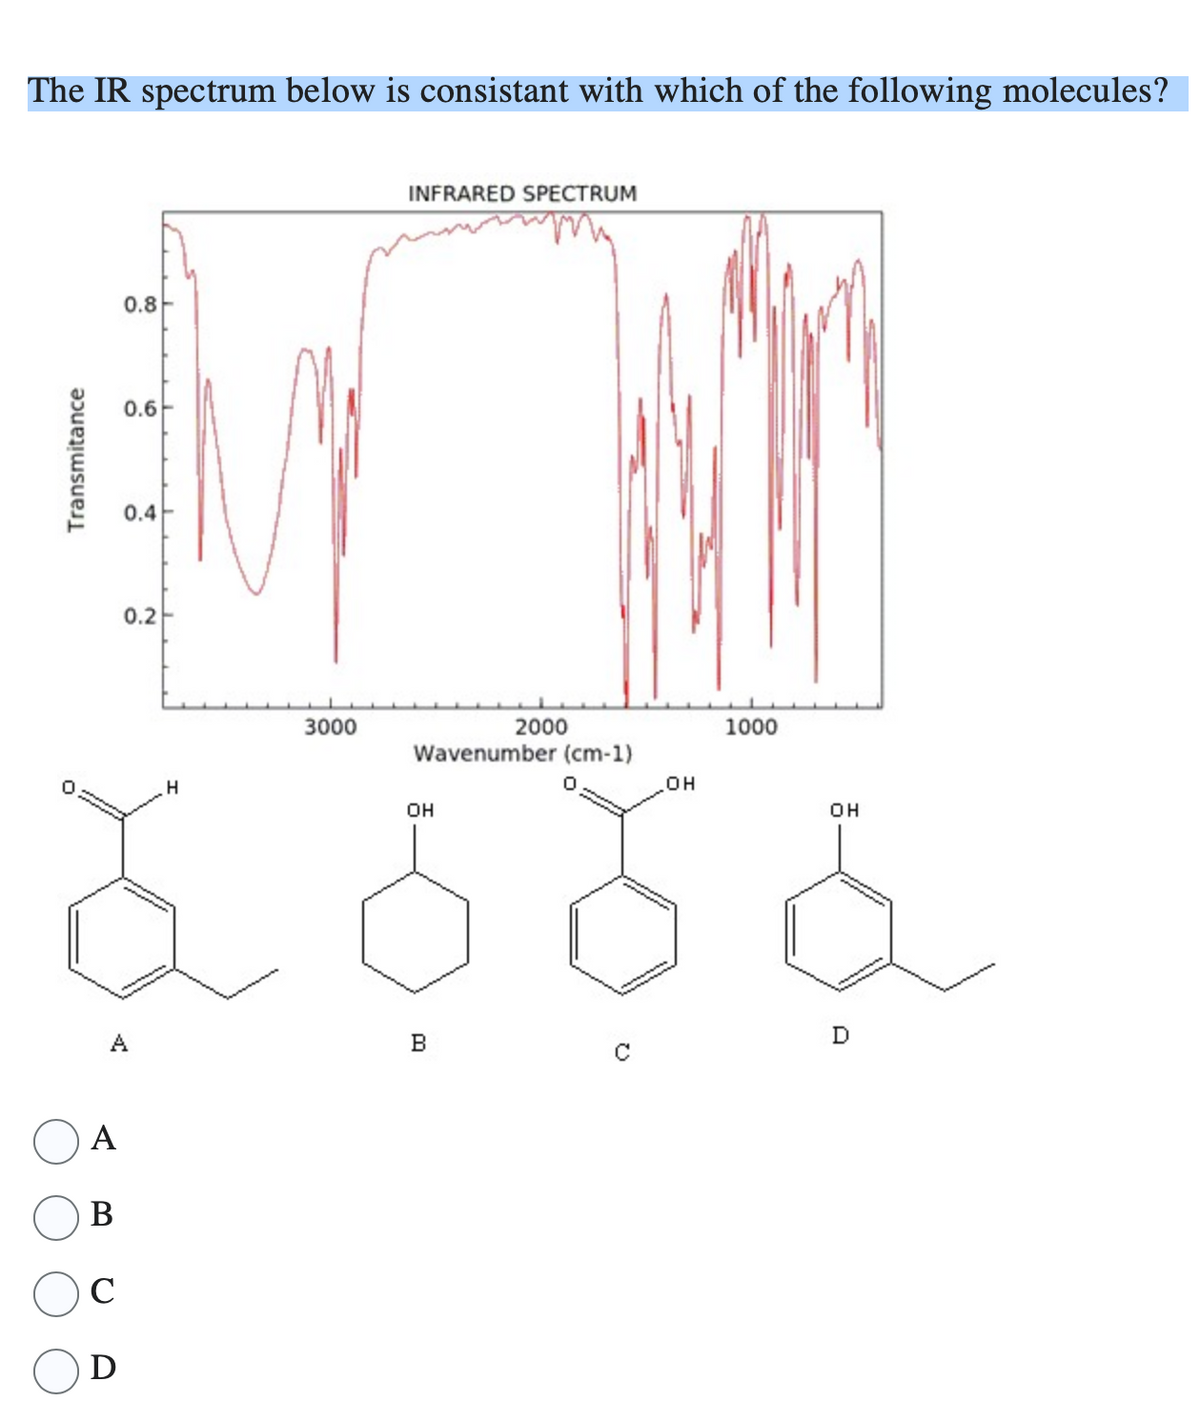 The IR spectrum below is consistant with which of the following molecules?
Transmitance
A
B
C
Ꭰ
0.8
0.6-
0.4
0.2
H
3000
INFRARED SPECTRUM
2000
Wavenumber (cm-1)
OH
OH
1000
OH
D
A
B